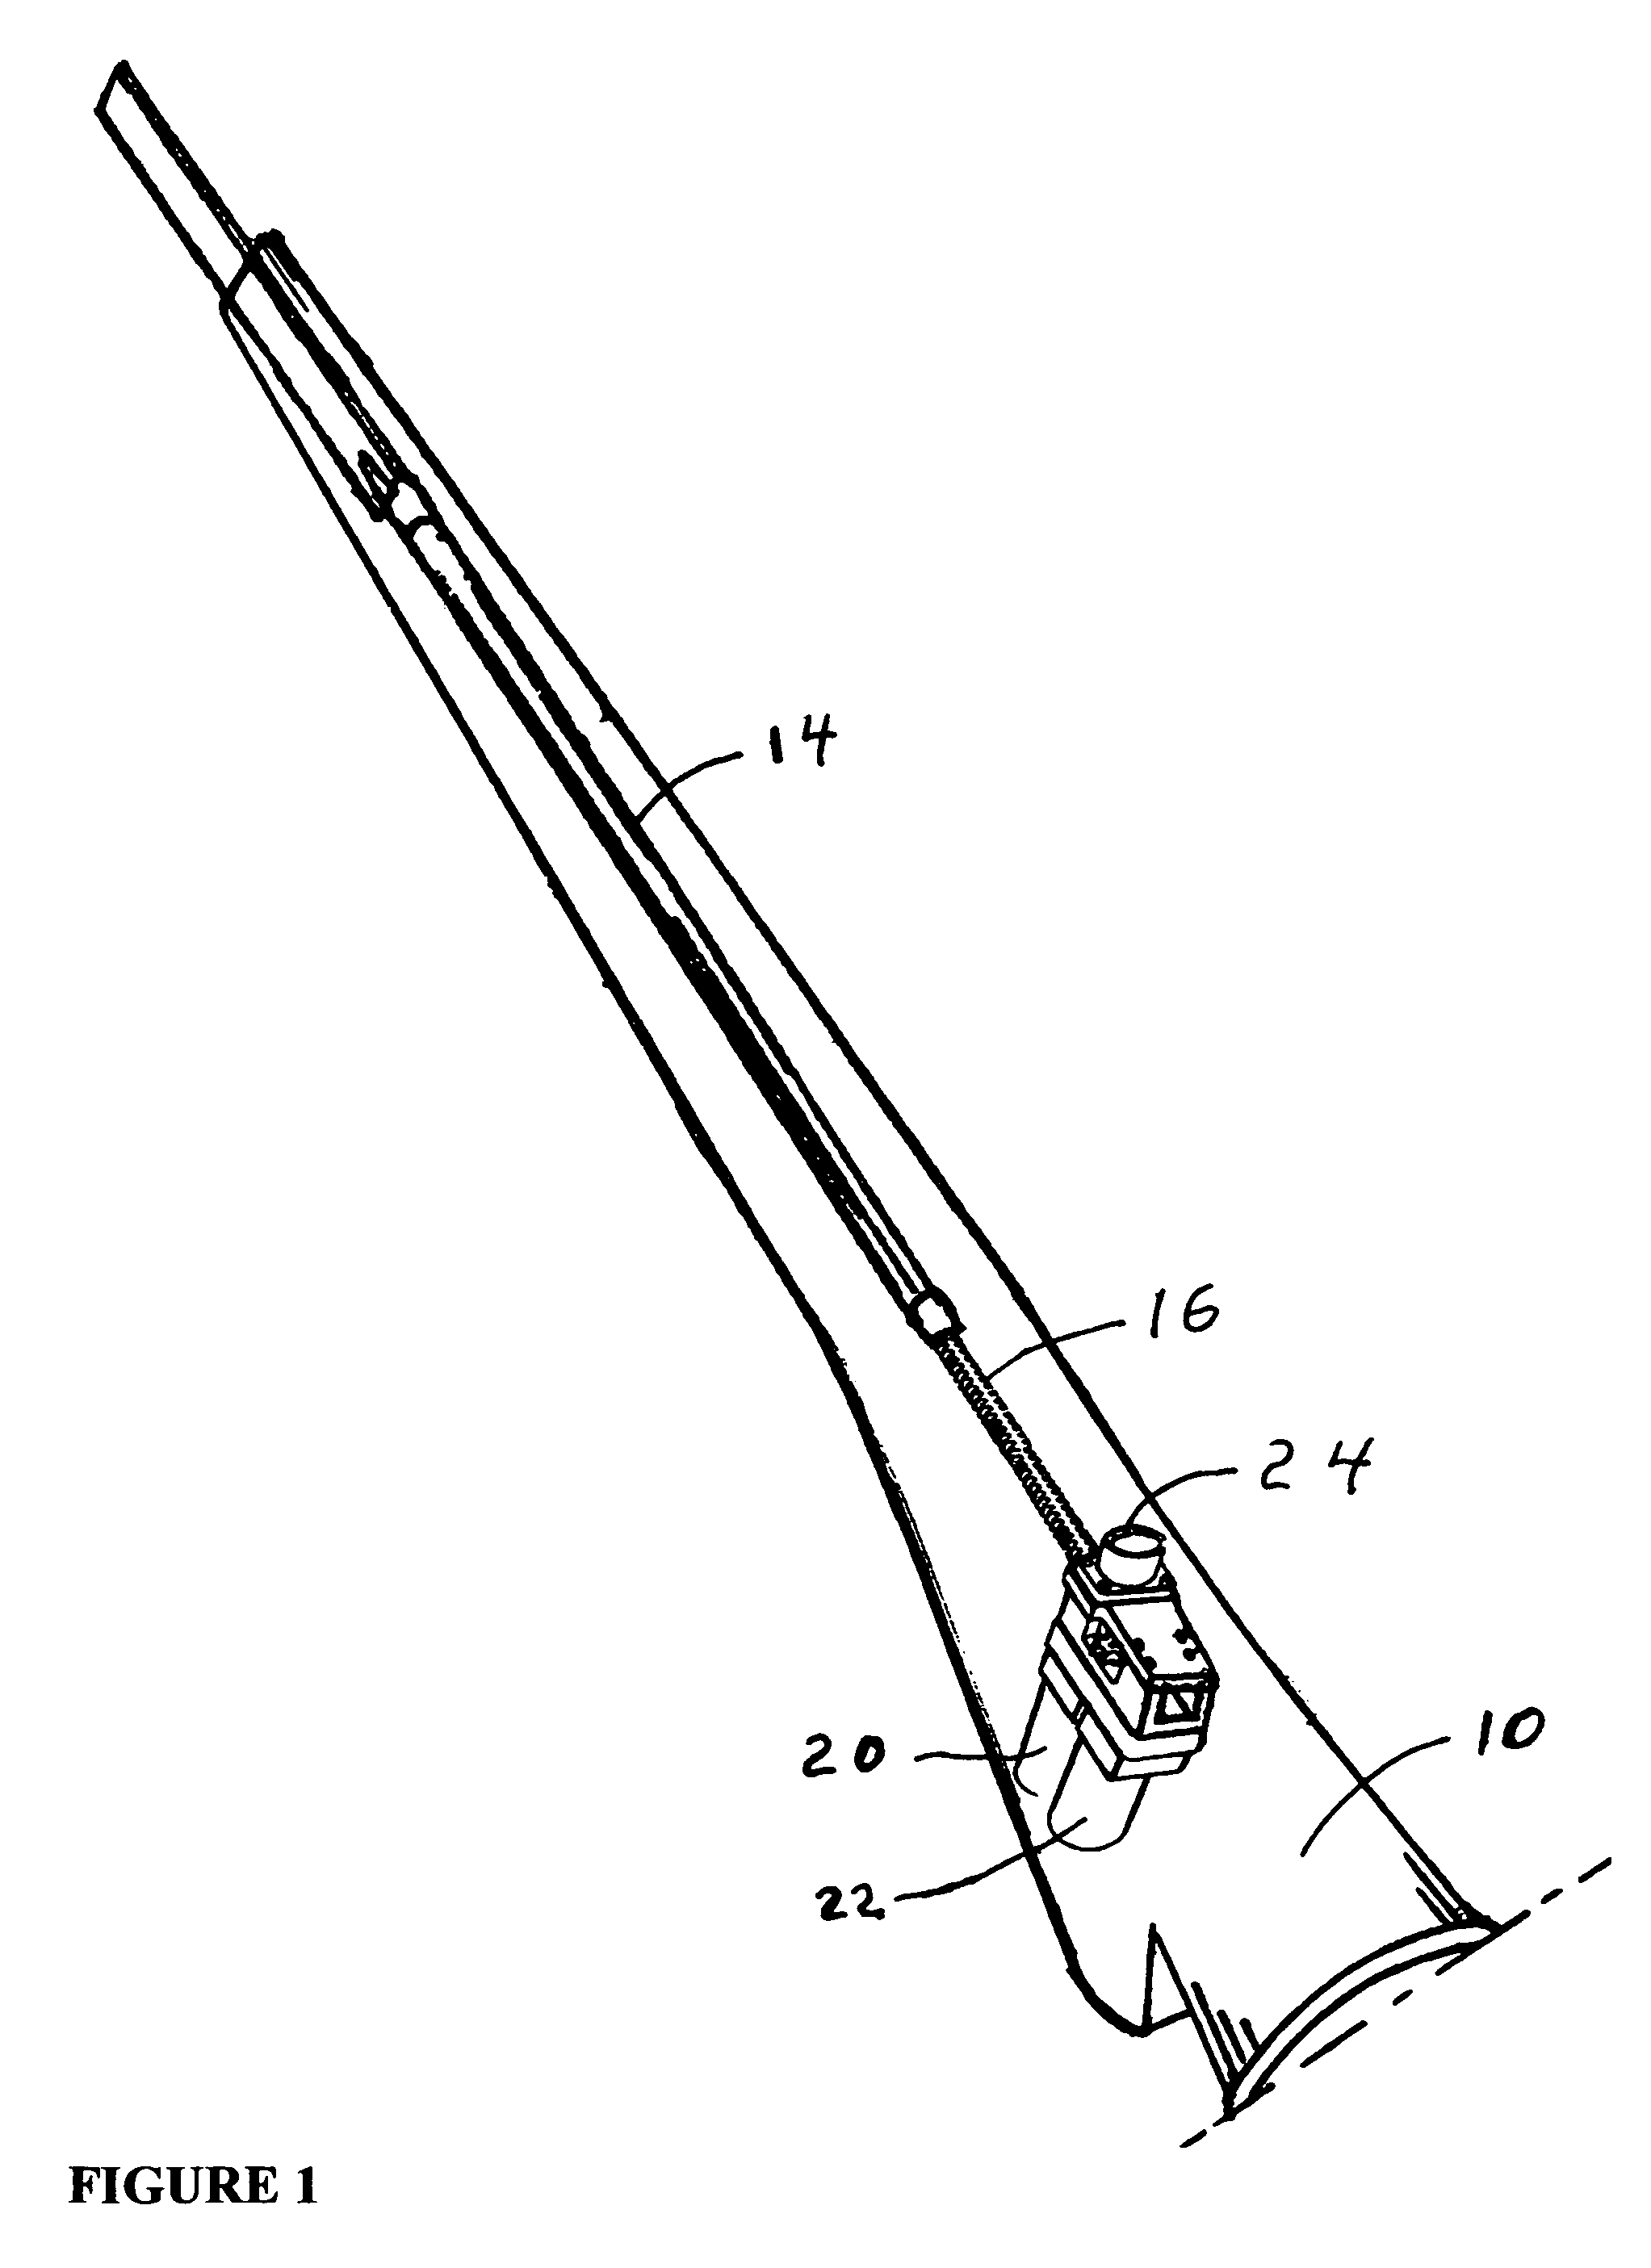 Servo-controlled extender mechanism for extendable rotor blades for power generating wind and ocean current turbines